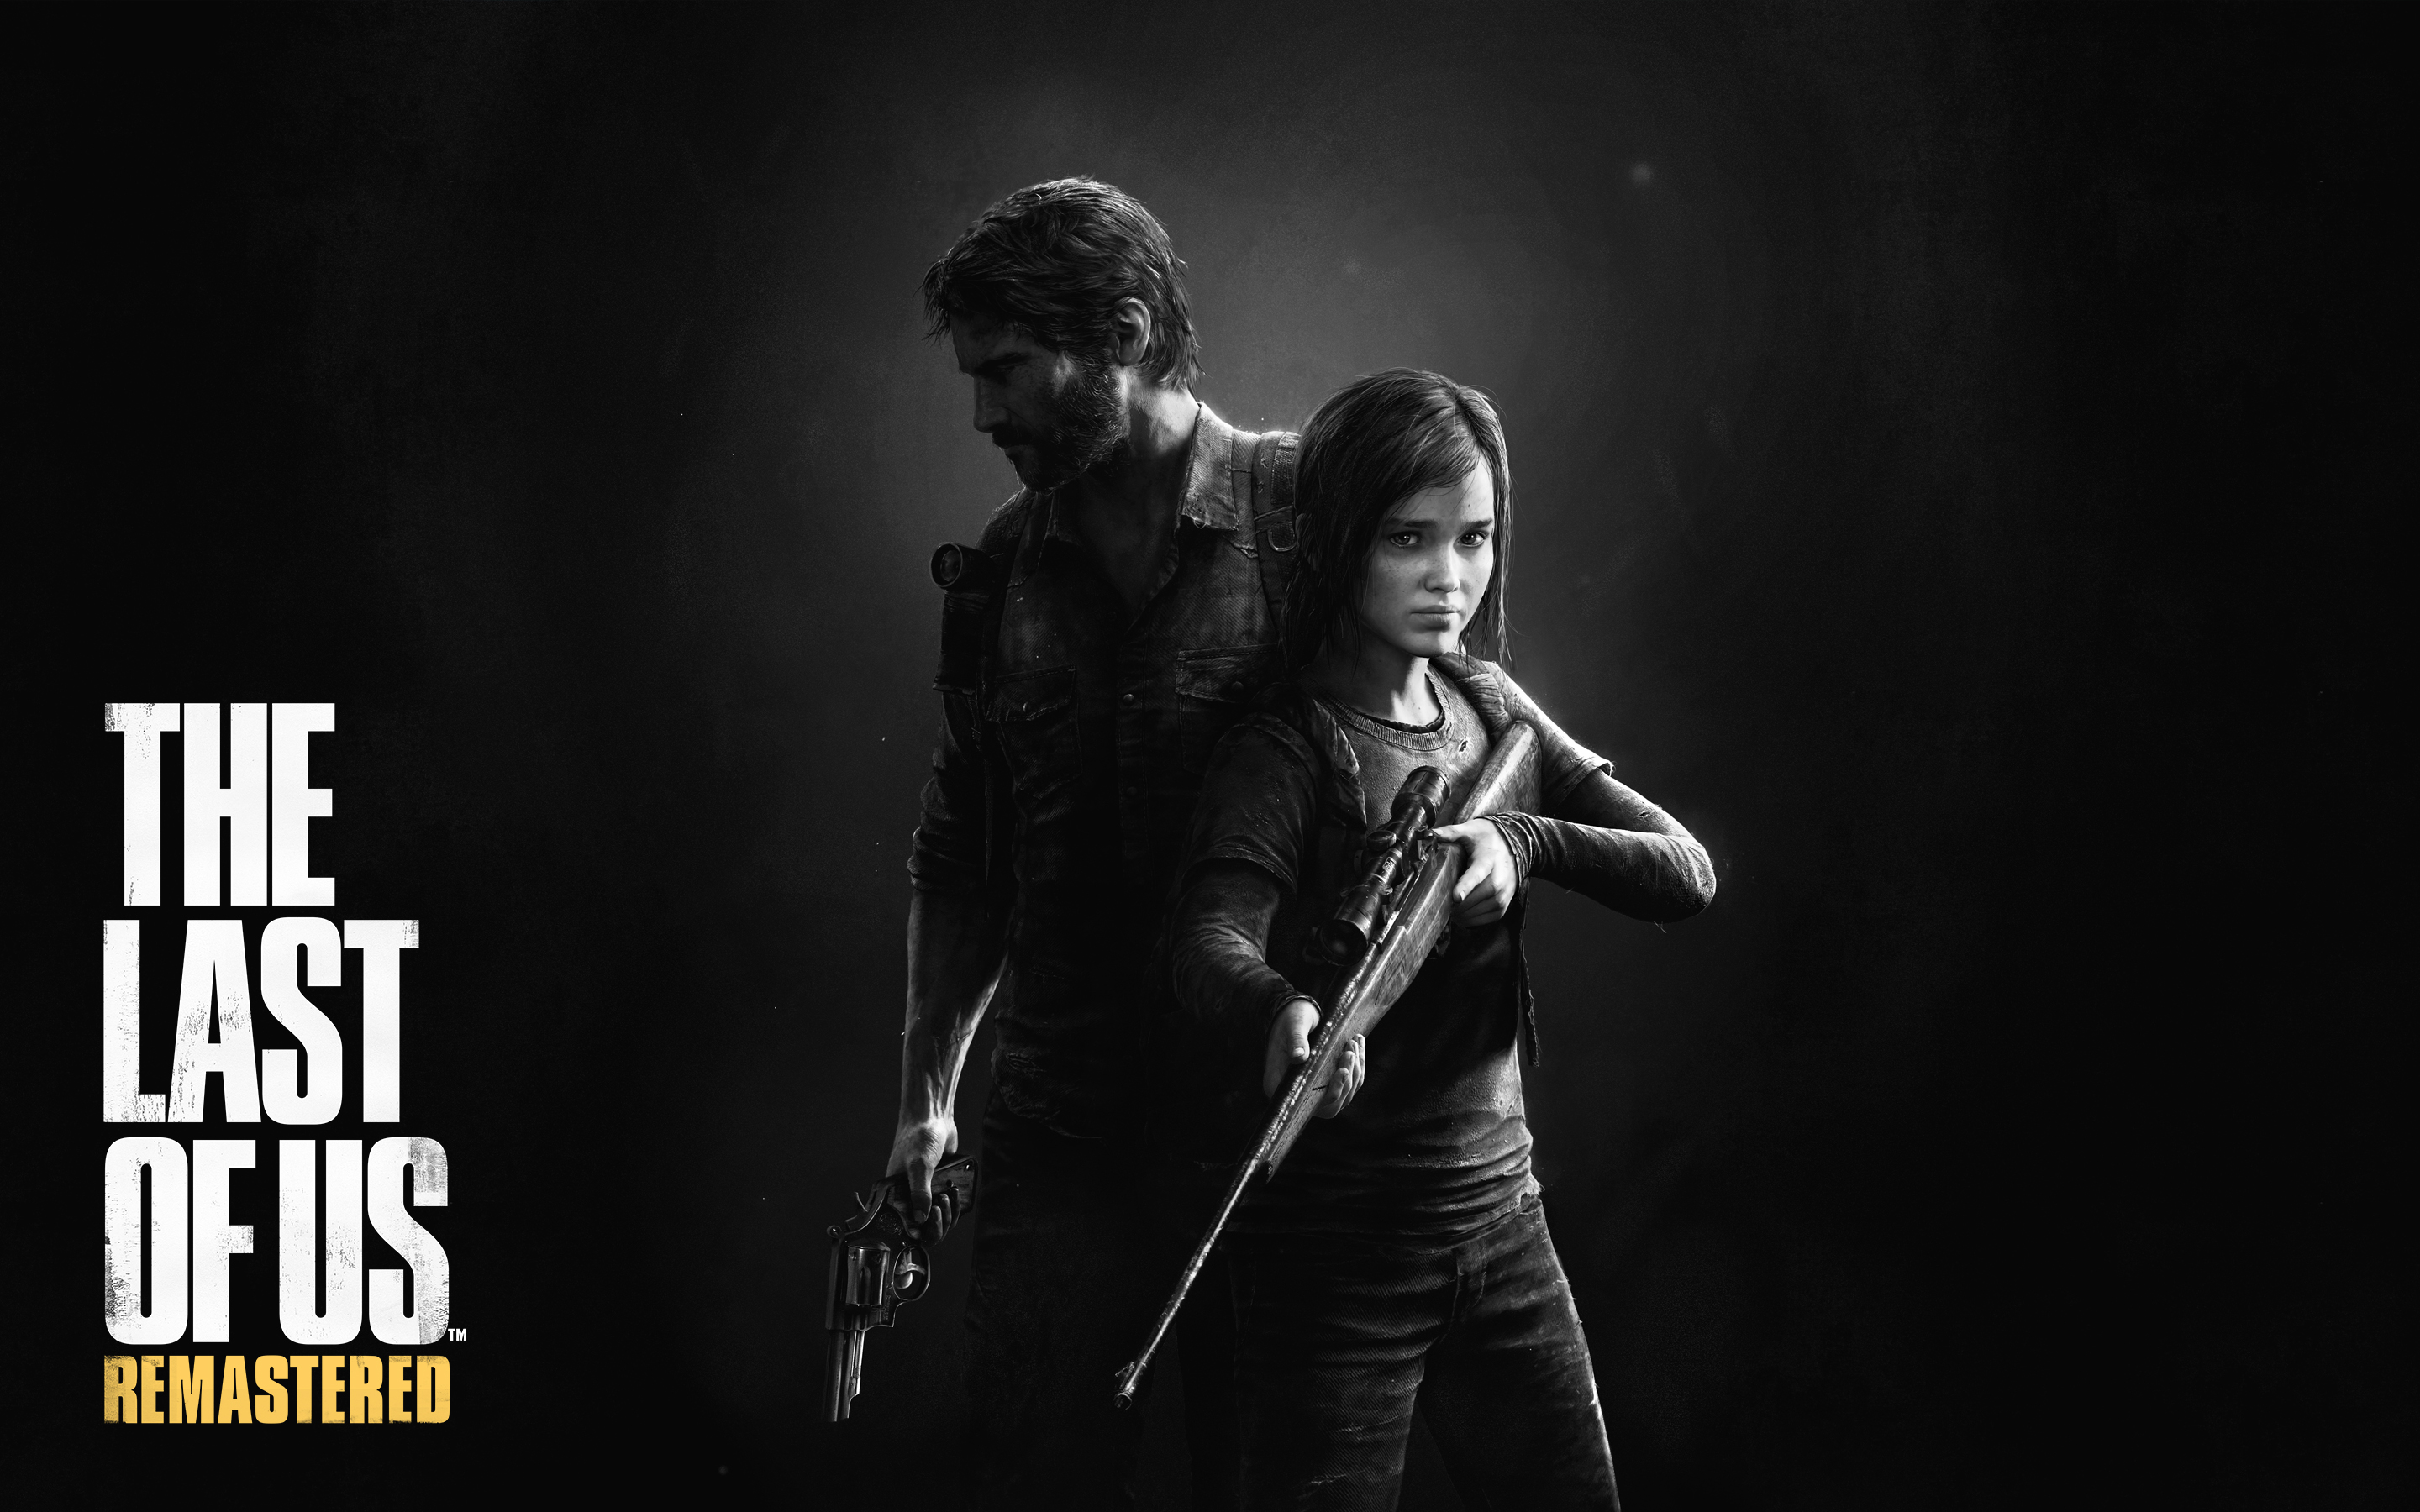 Last of us steam release фото 31